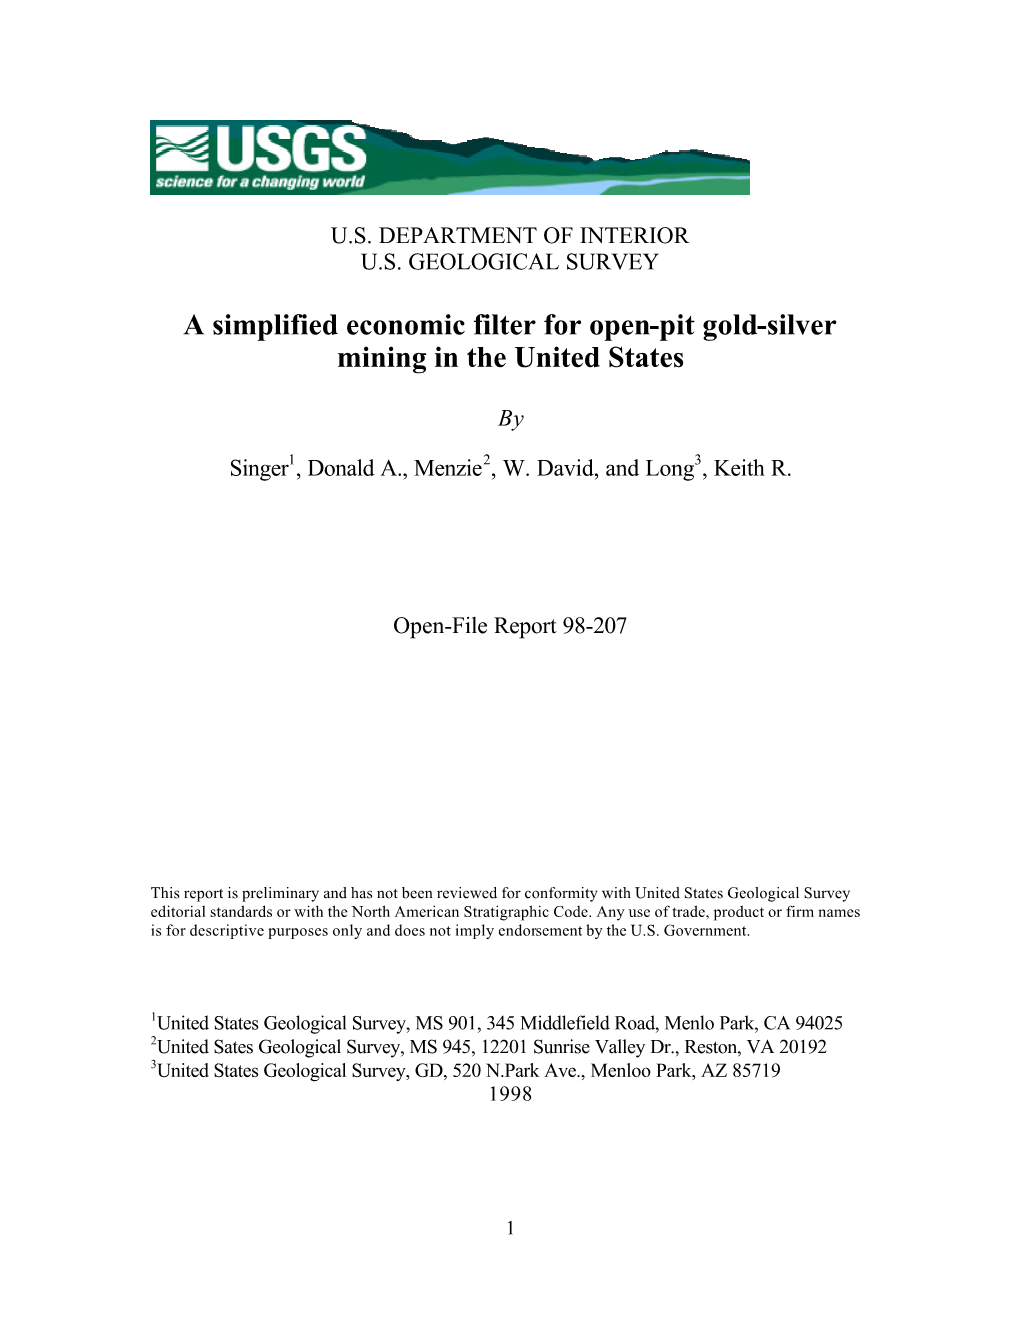 A Simplified Economic Filter for Open-Pit Gold-Silver Mining in the United States